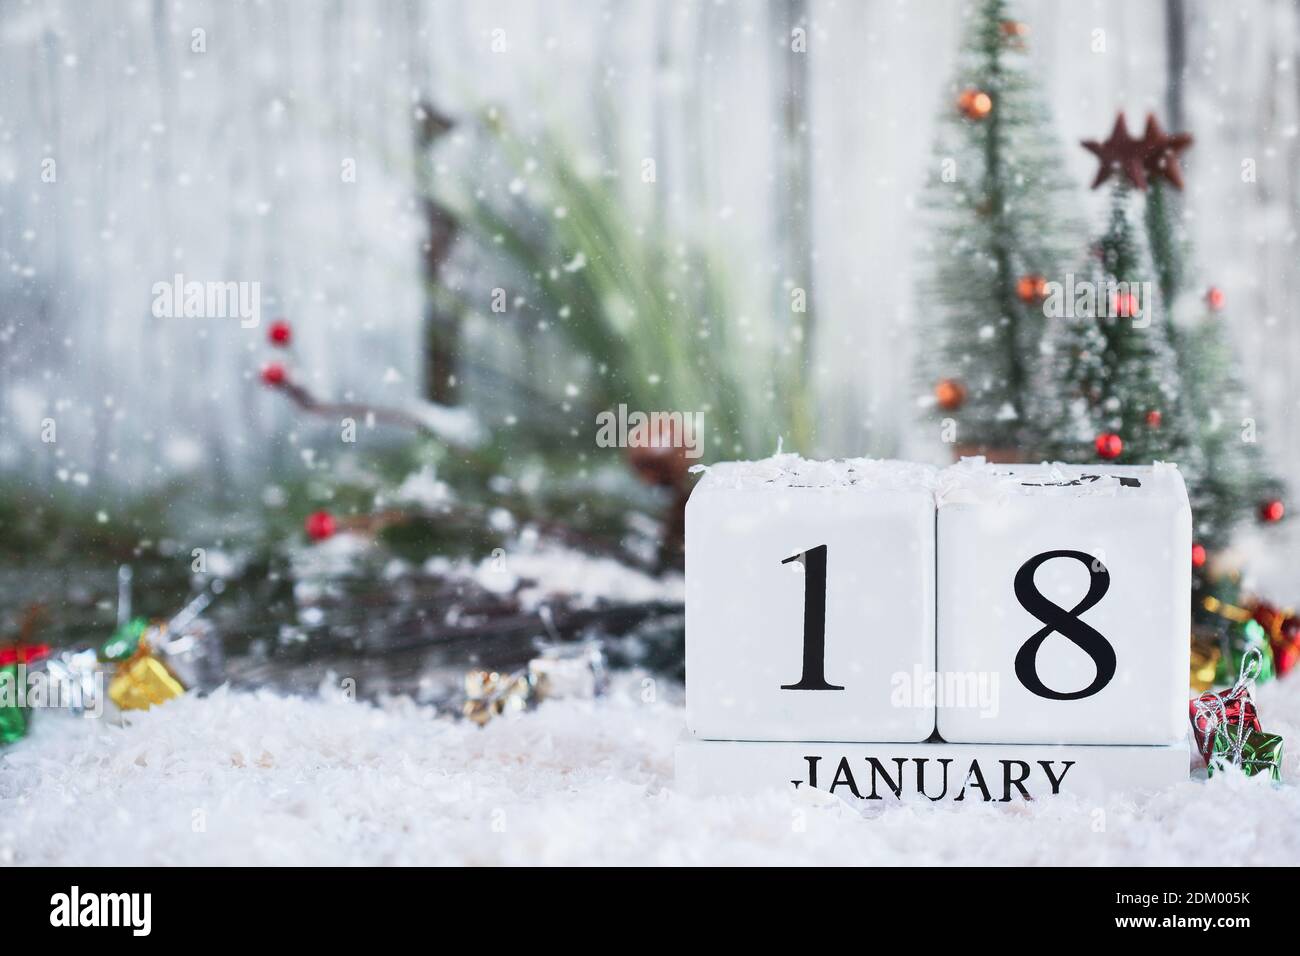 Martin Luther King Jr Birthday. White wood calendar blocks with the date January 18th with snow. Selective focus with blurred background. Stock Photo